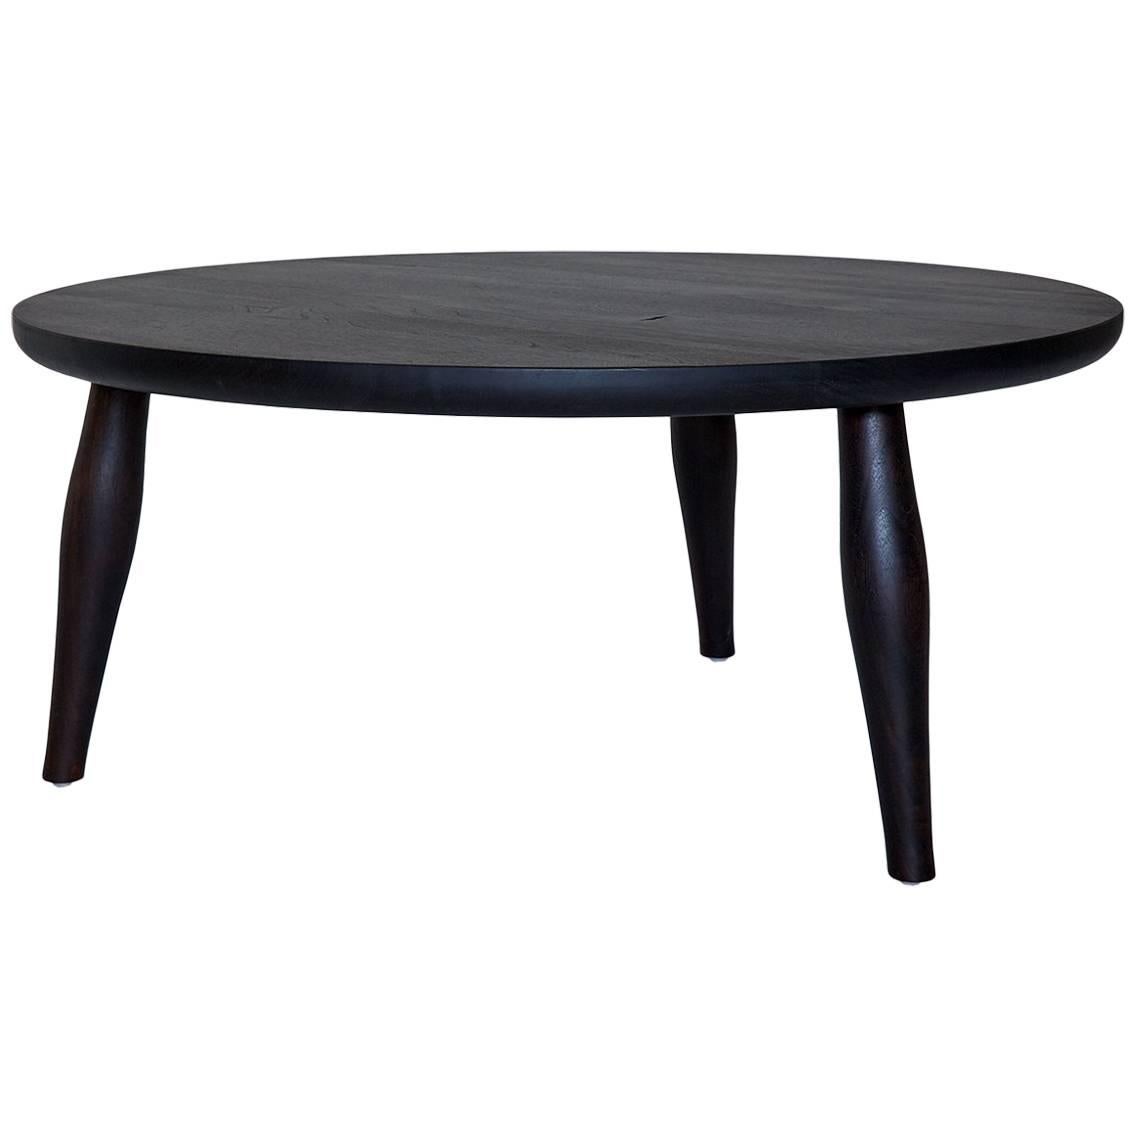 Swell Coffee Table For Sale